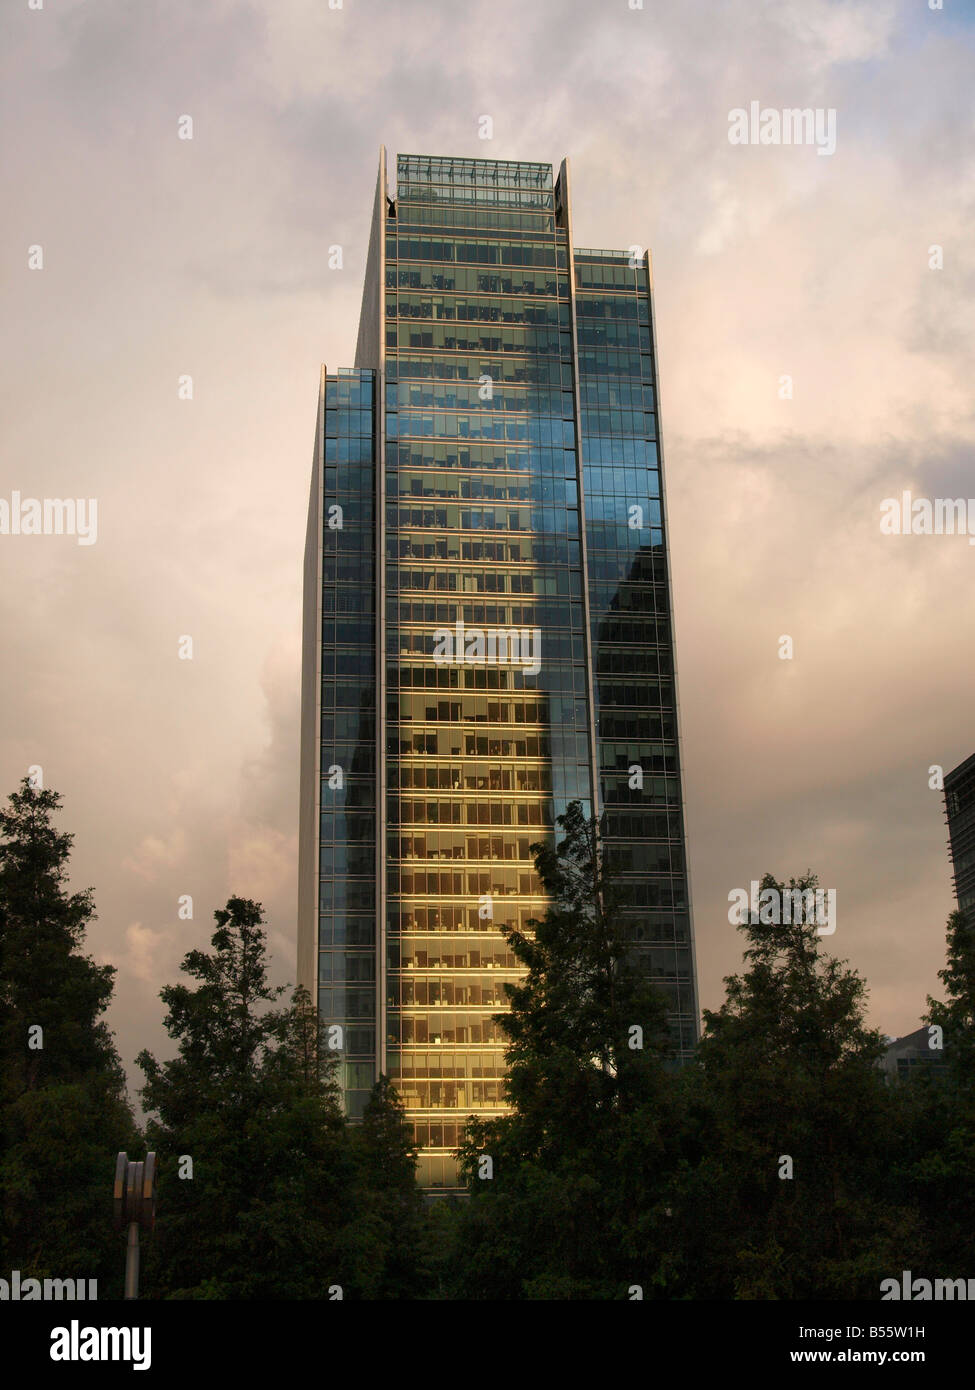 Canary Wharf Docklands office tower London UK Banque D'Images